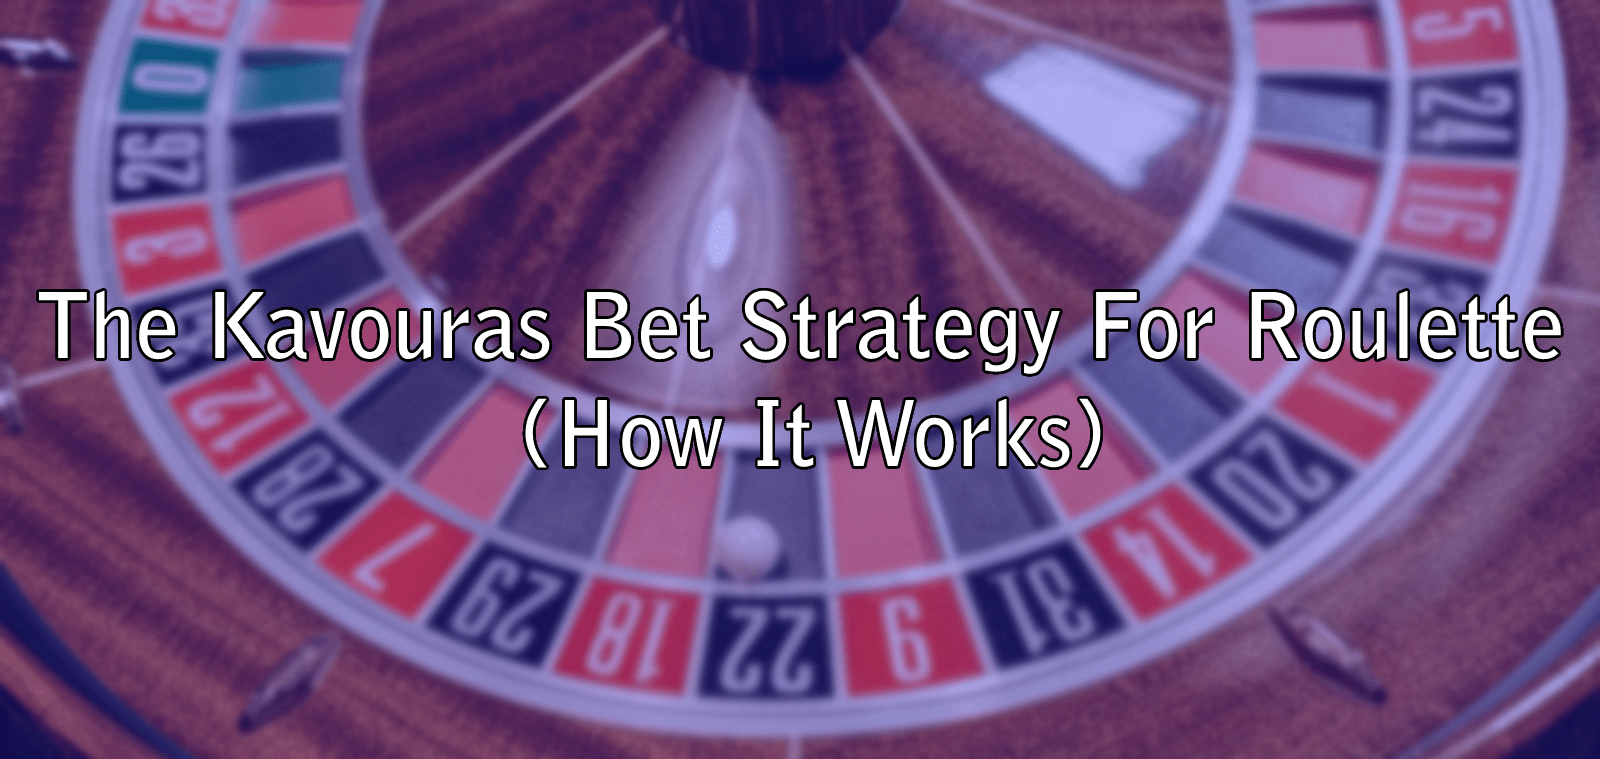 The Kavouras Bet Strategy For Roulette (How It Works)